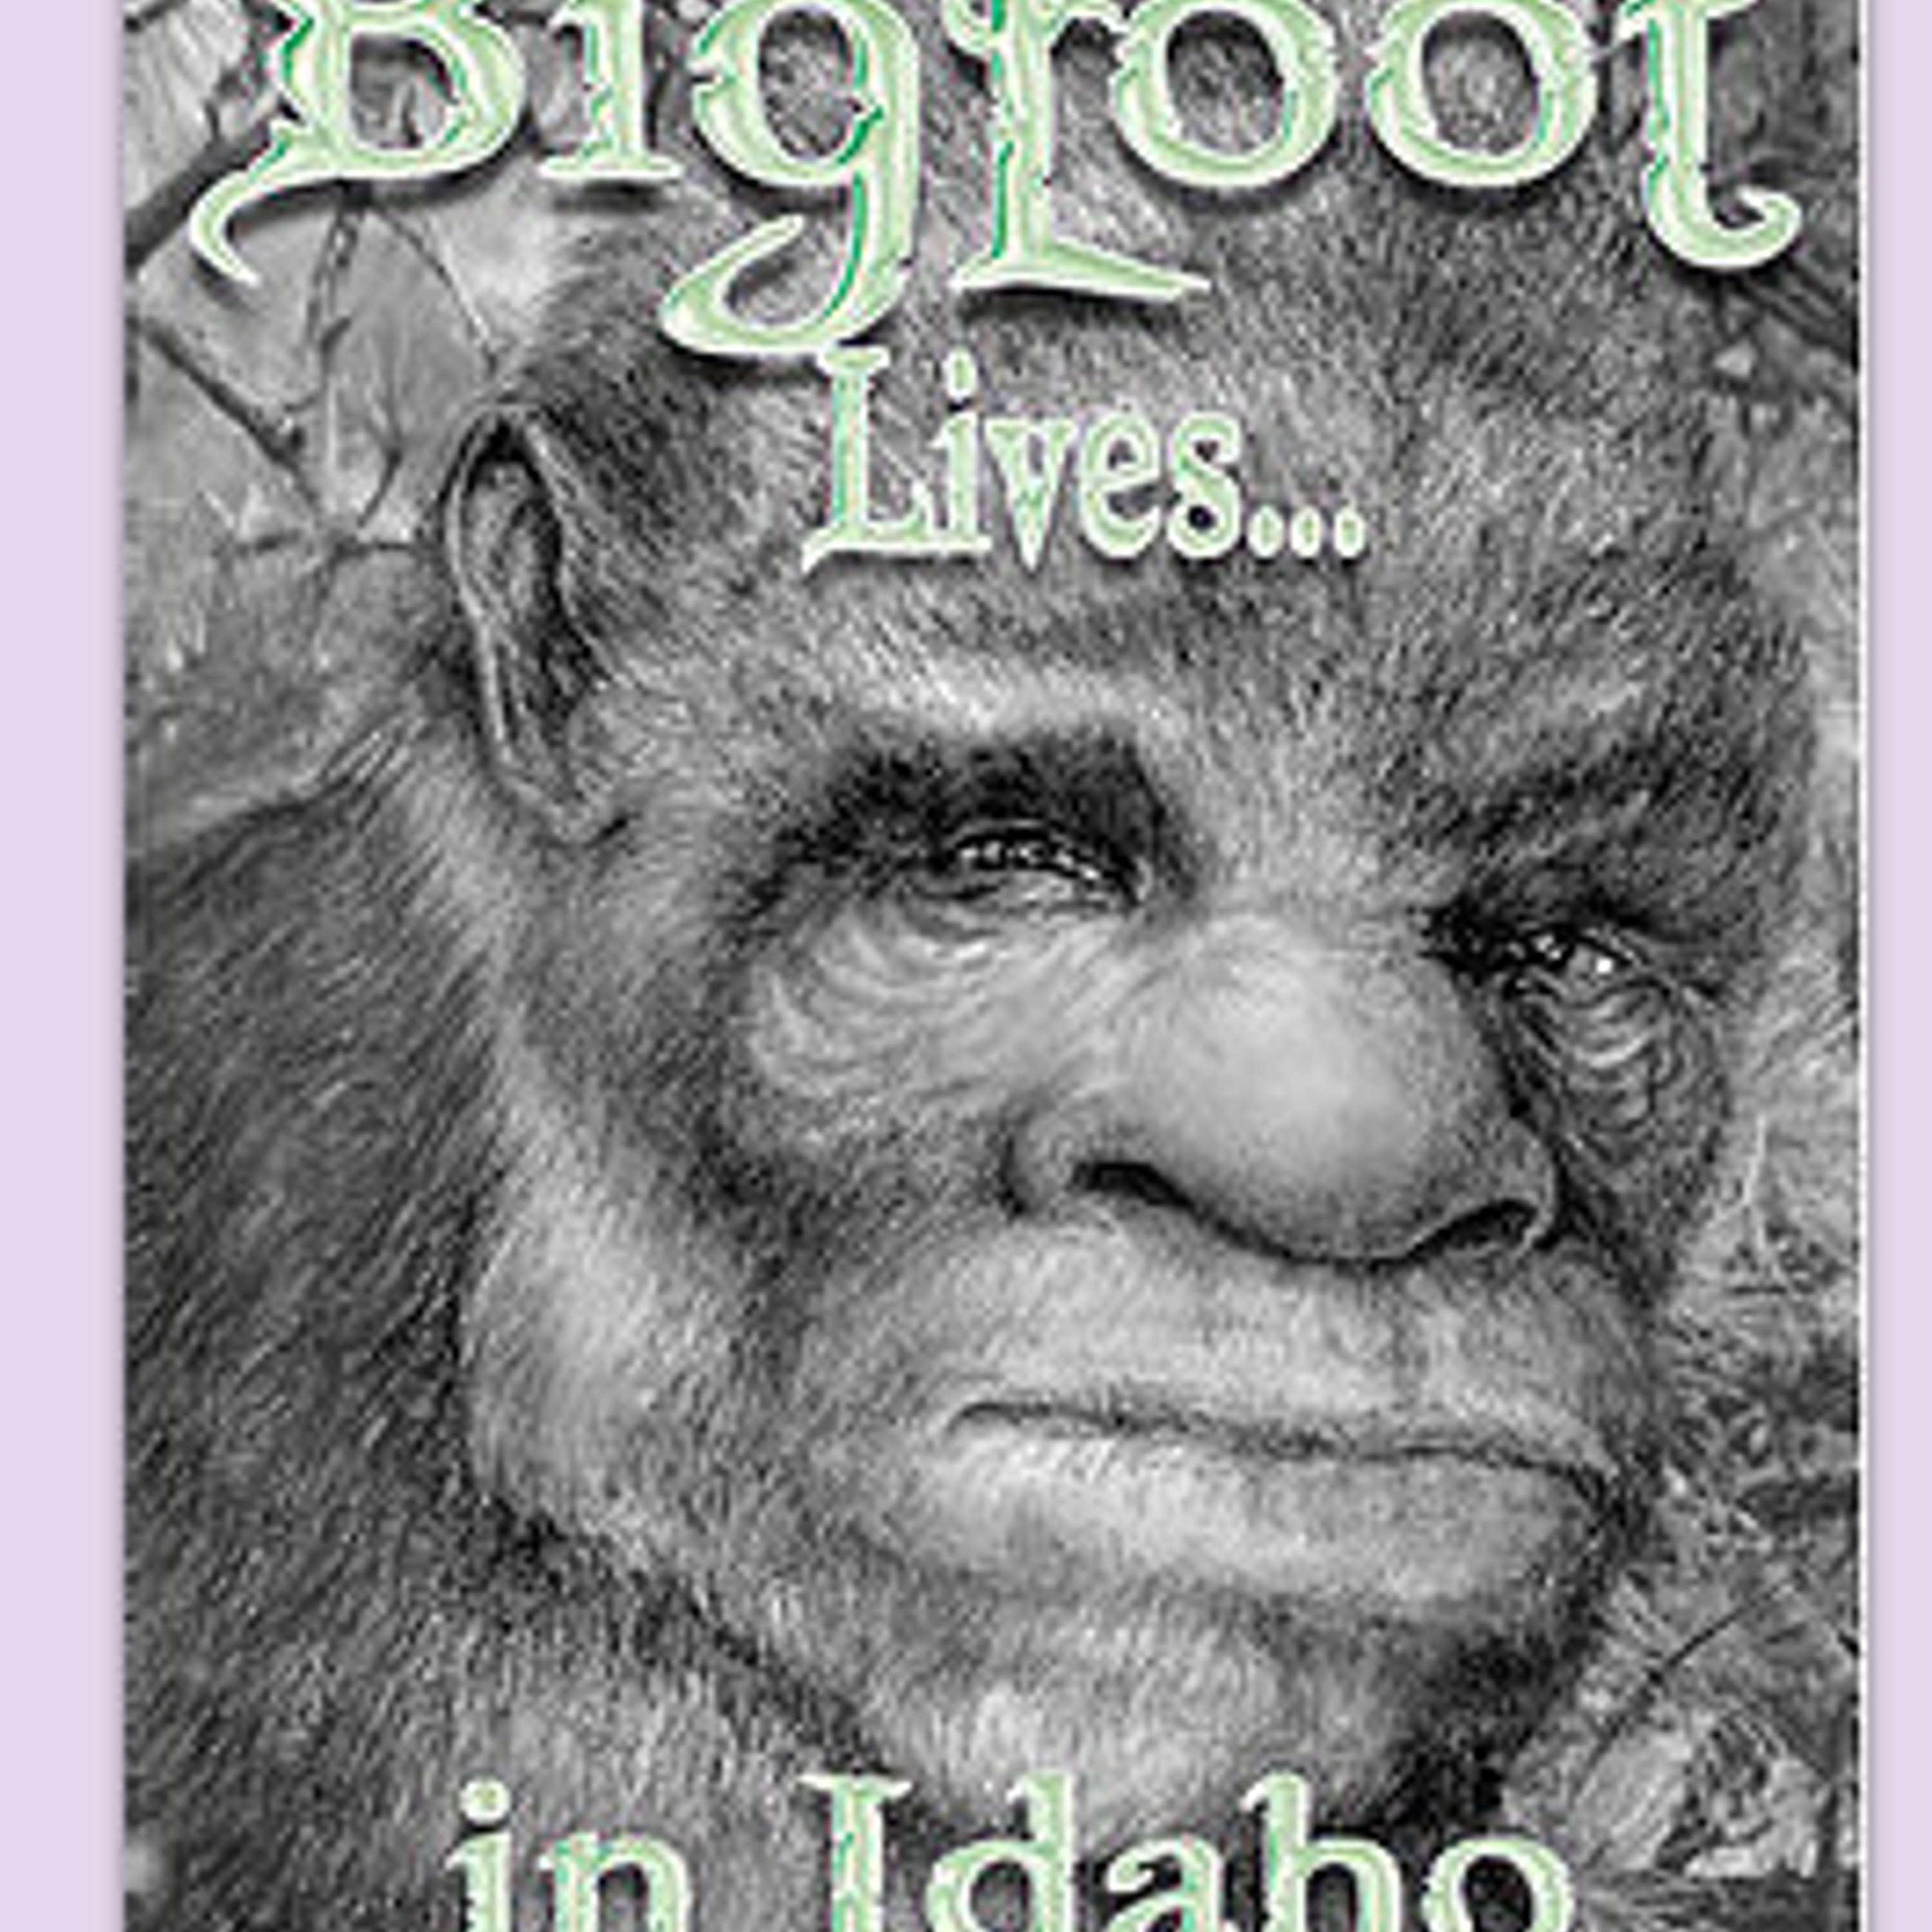 Trailer 2: The Pumphouse. ***PREMIERS FRIDAY 5/21/2021 9 PM EST*** Bigfoot in Idaho with Special Guest Award-Winning Author Becky Cook Part 1 ***PREMIERS FRIDAY 5/21/2021 9 PM EST***